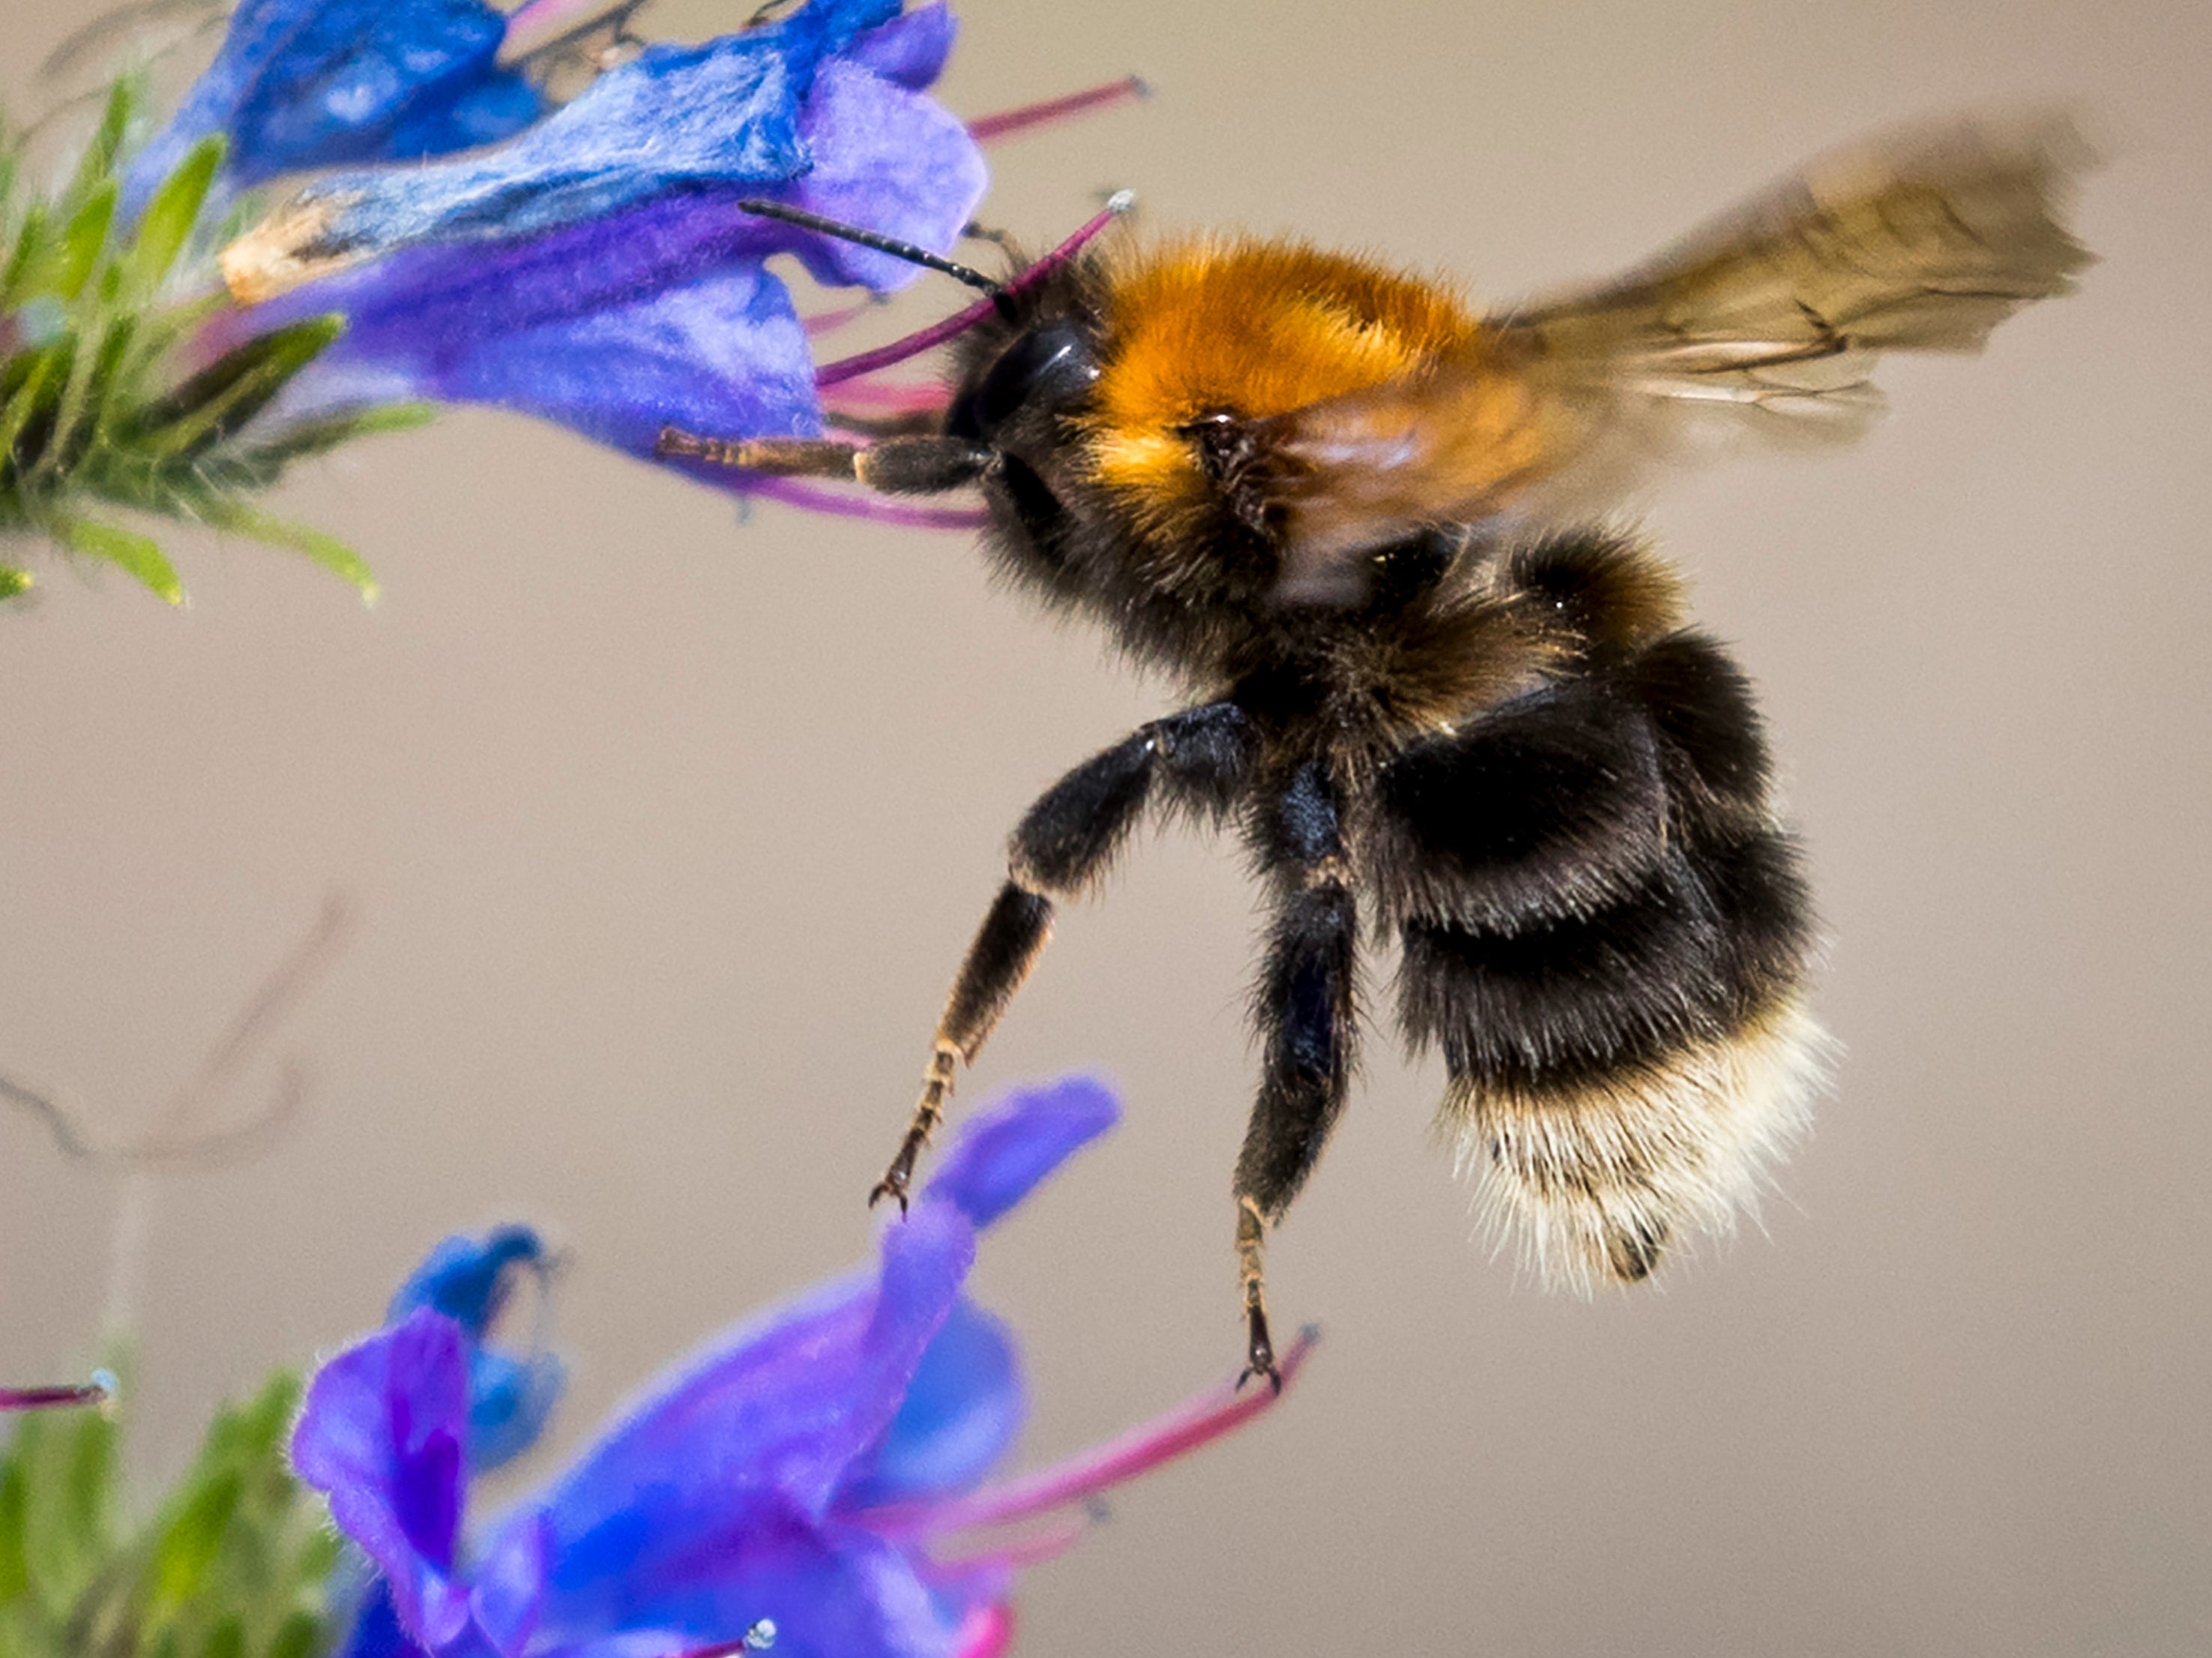 A third of the UK bees have disappeared in 10 years